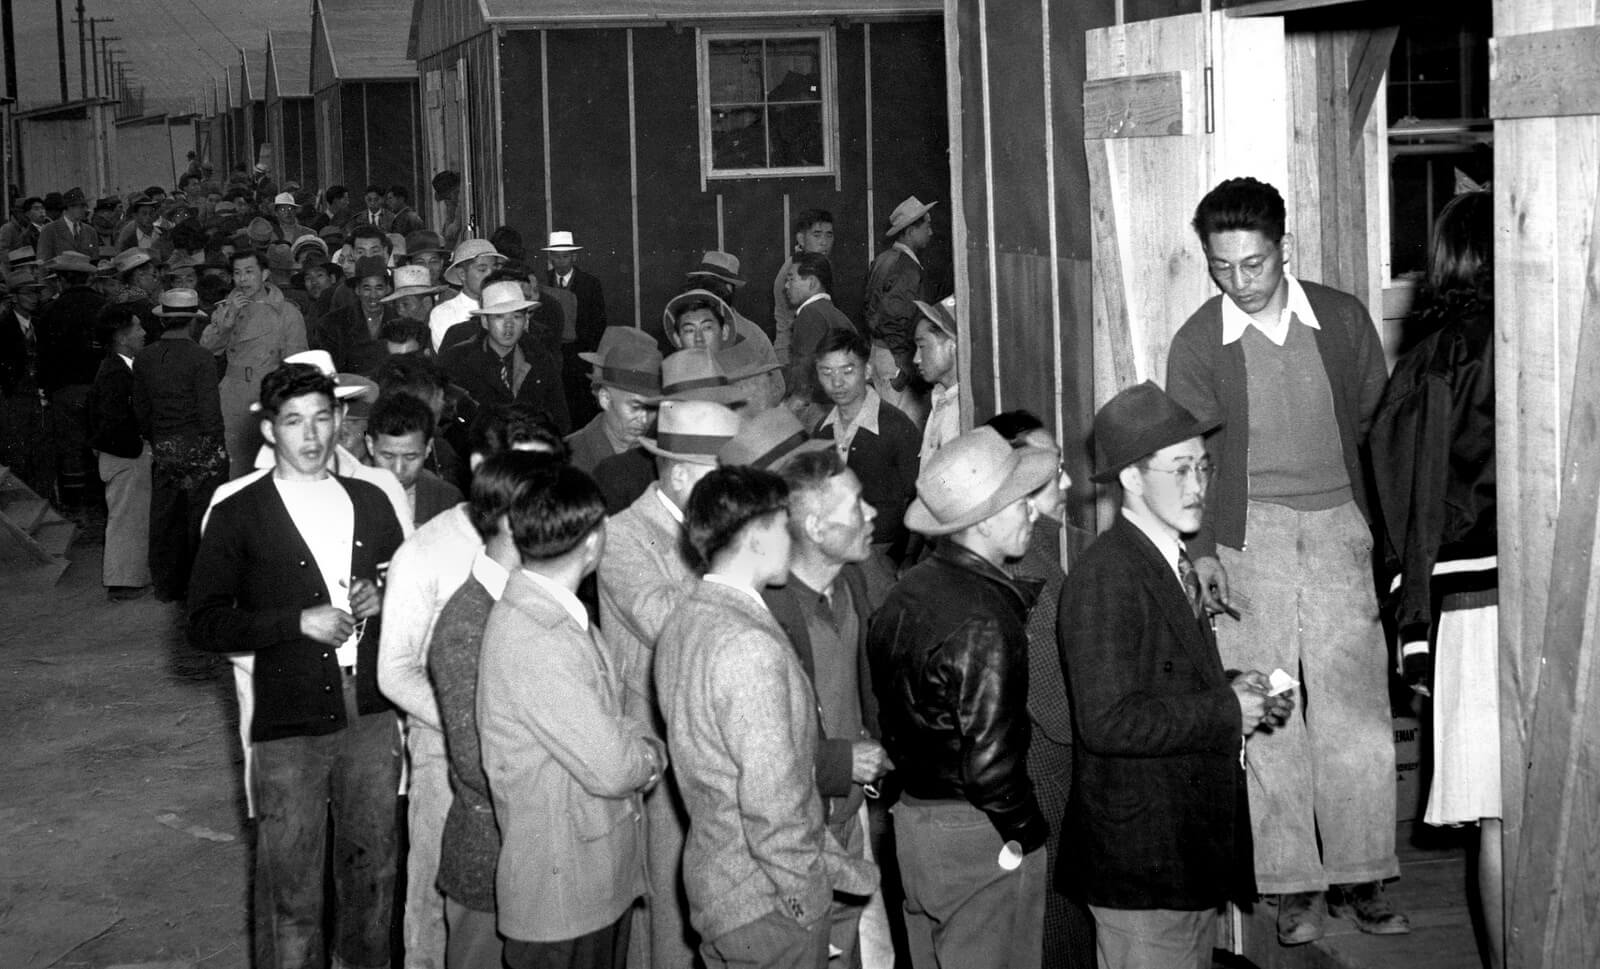 After being forced from the homes in Los Angeles by the U.S. Army, Japanese civilians wait in line for their assigned homes at an alien reception center in Manzanar, Calif. 120,000 Japanese-Americans were imprisoned during World War II. Photo | AP